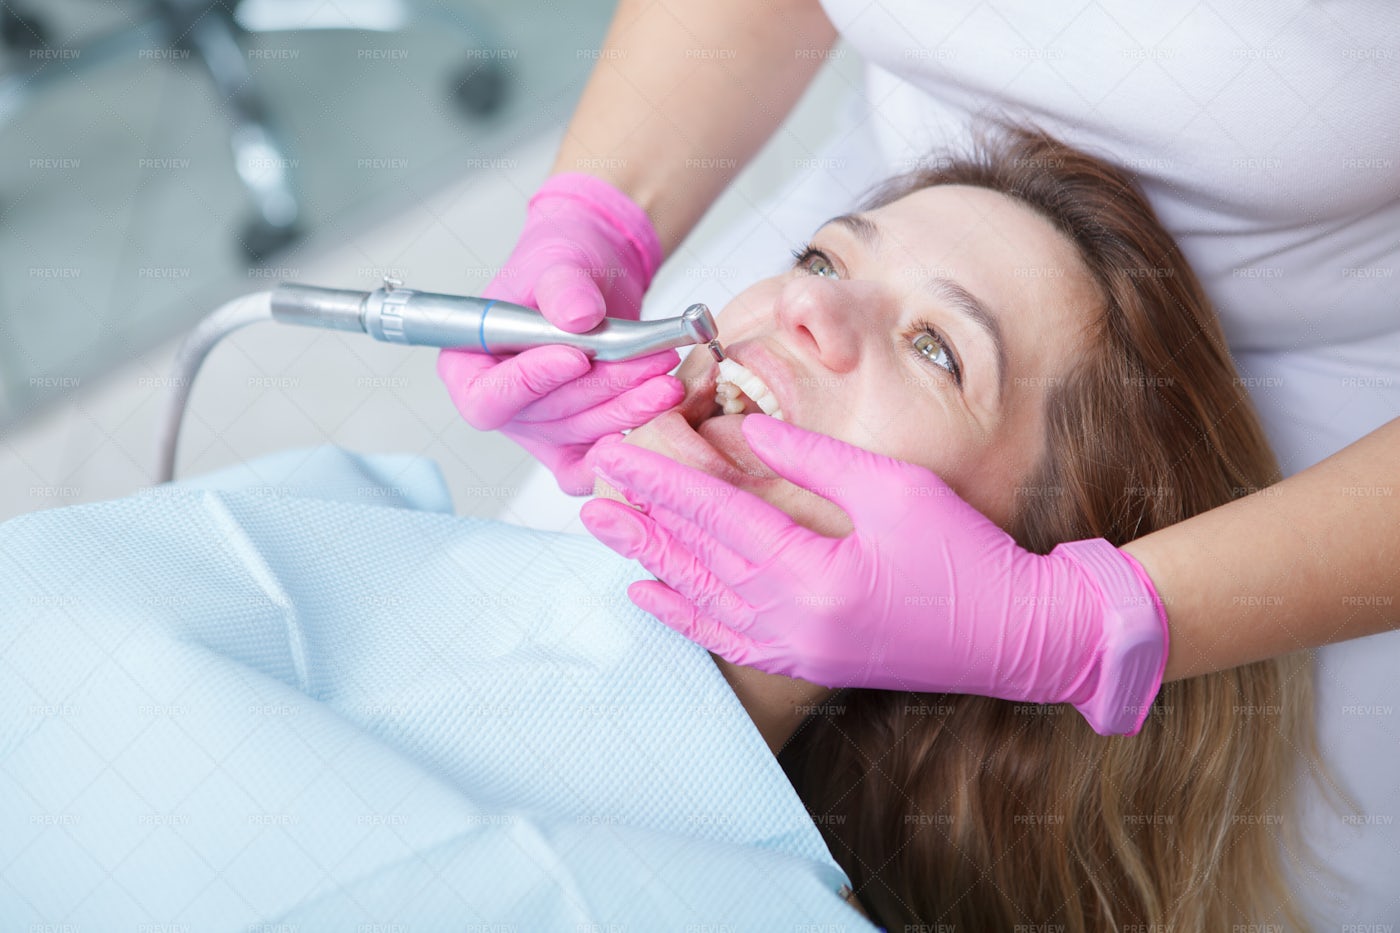 Dental Patient Getting Teeth Cleaned: Stock Photos